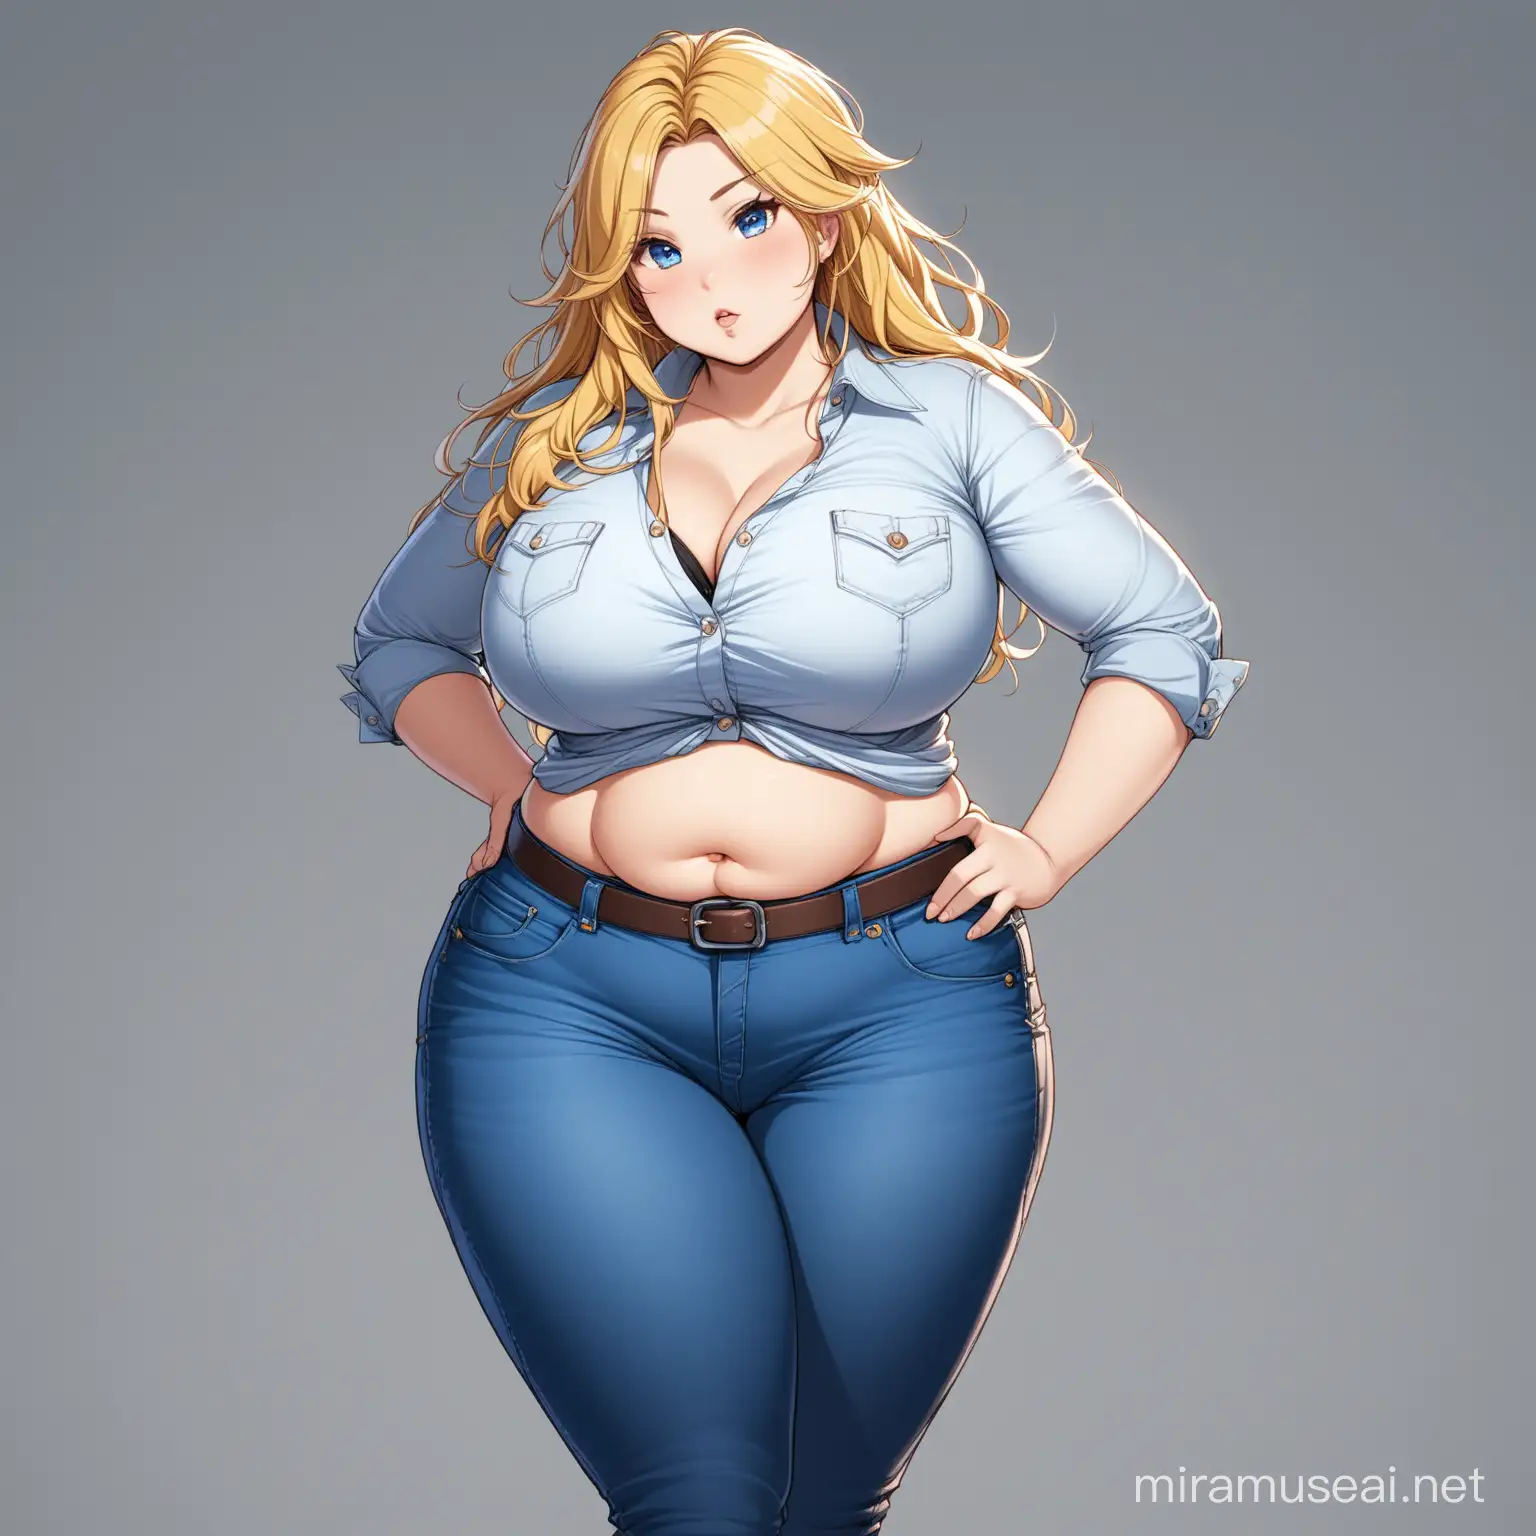 Blonde Curvy Woman in Casual Jeans and ButtonUp